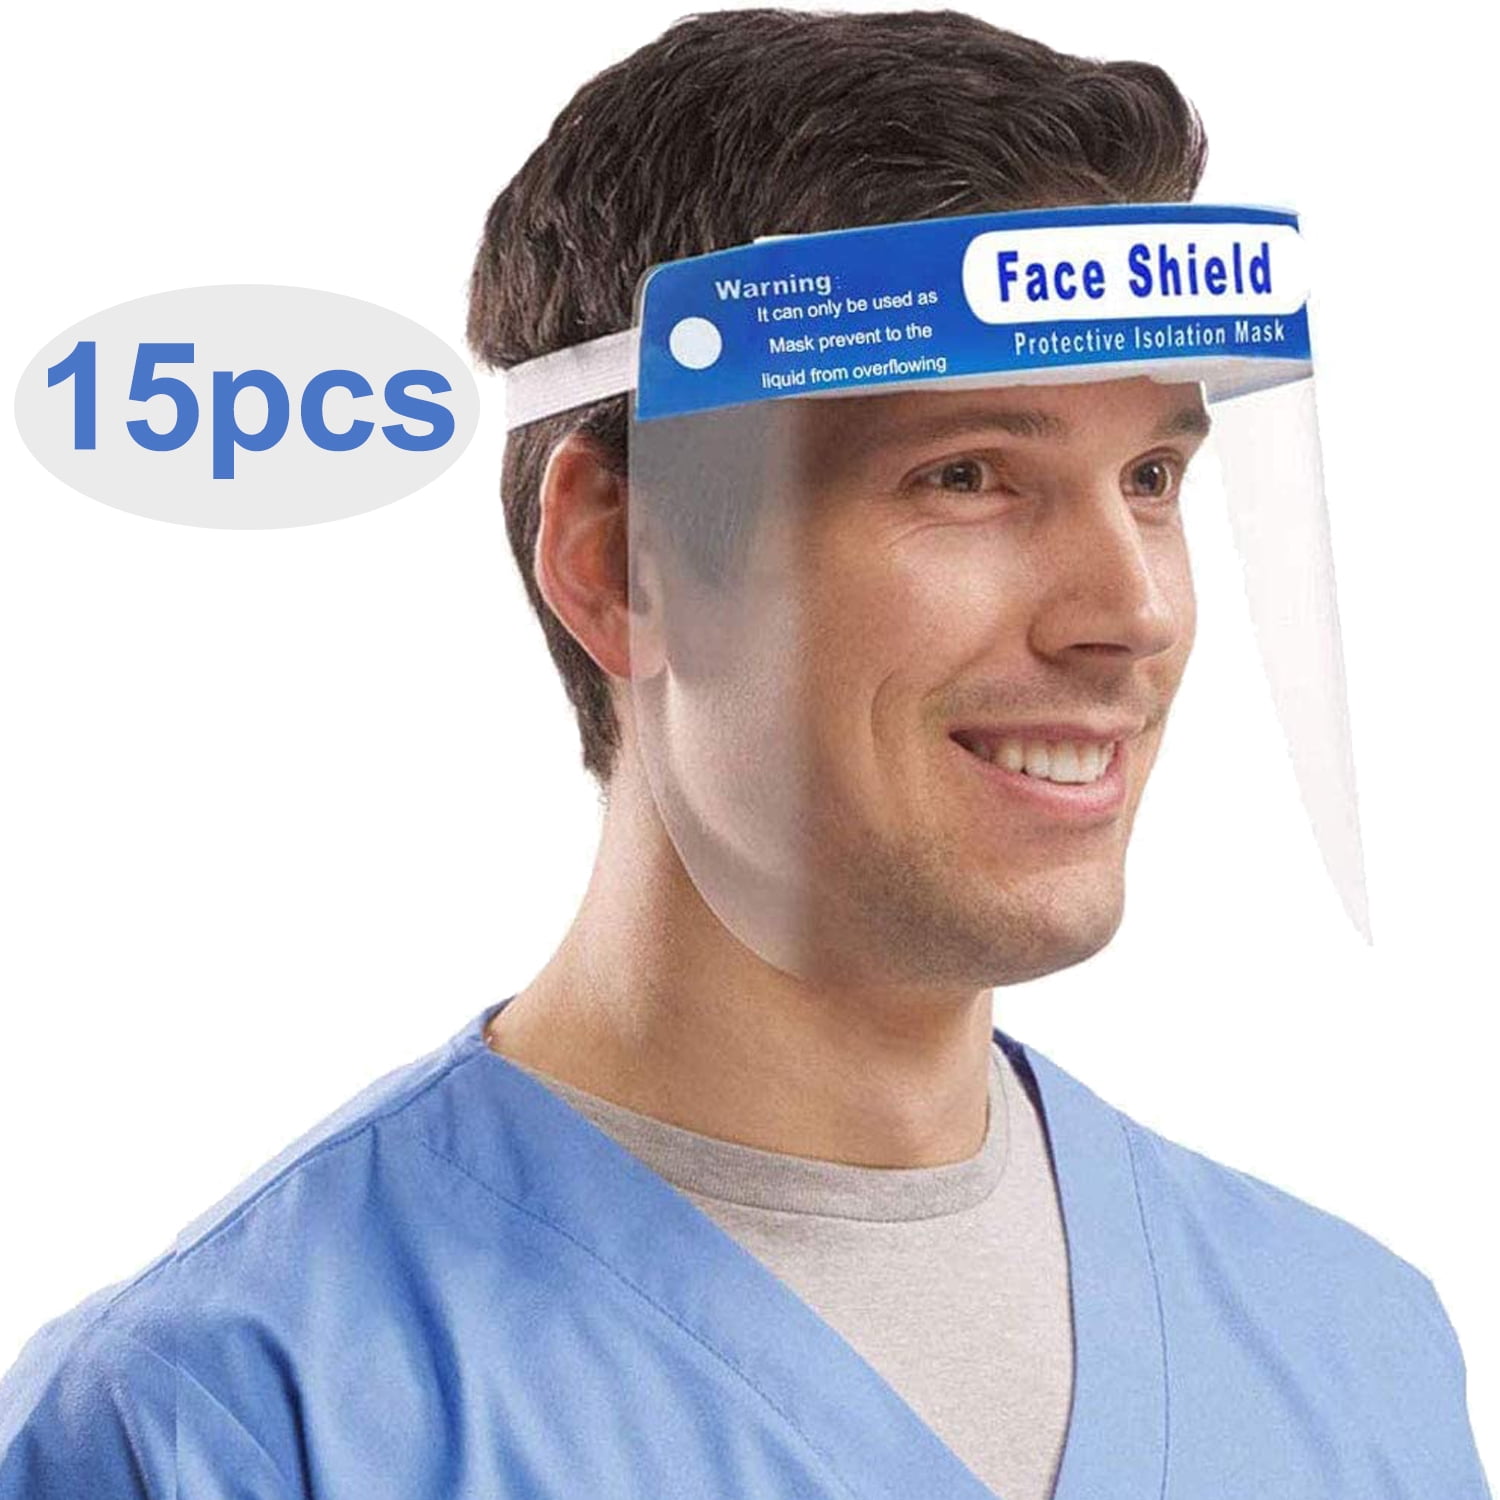 Clear Protective Full Face Shields Protect Eyes Nose 10pk Face Shields Mouth 